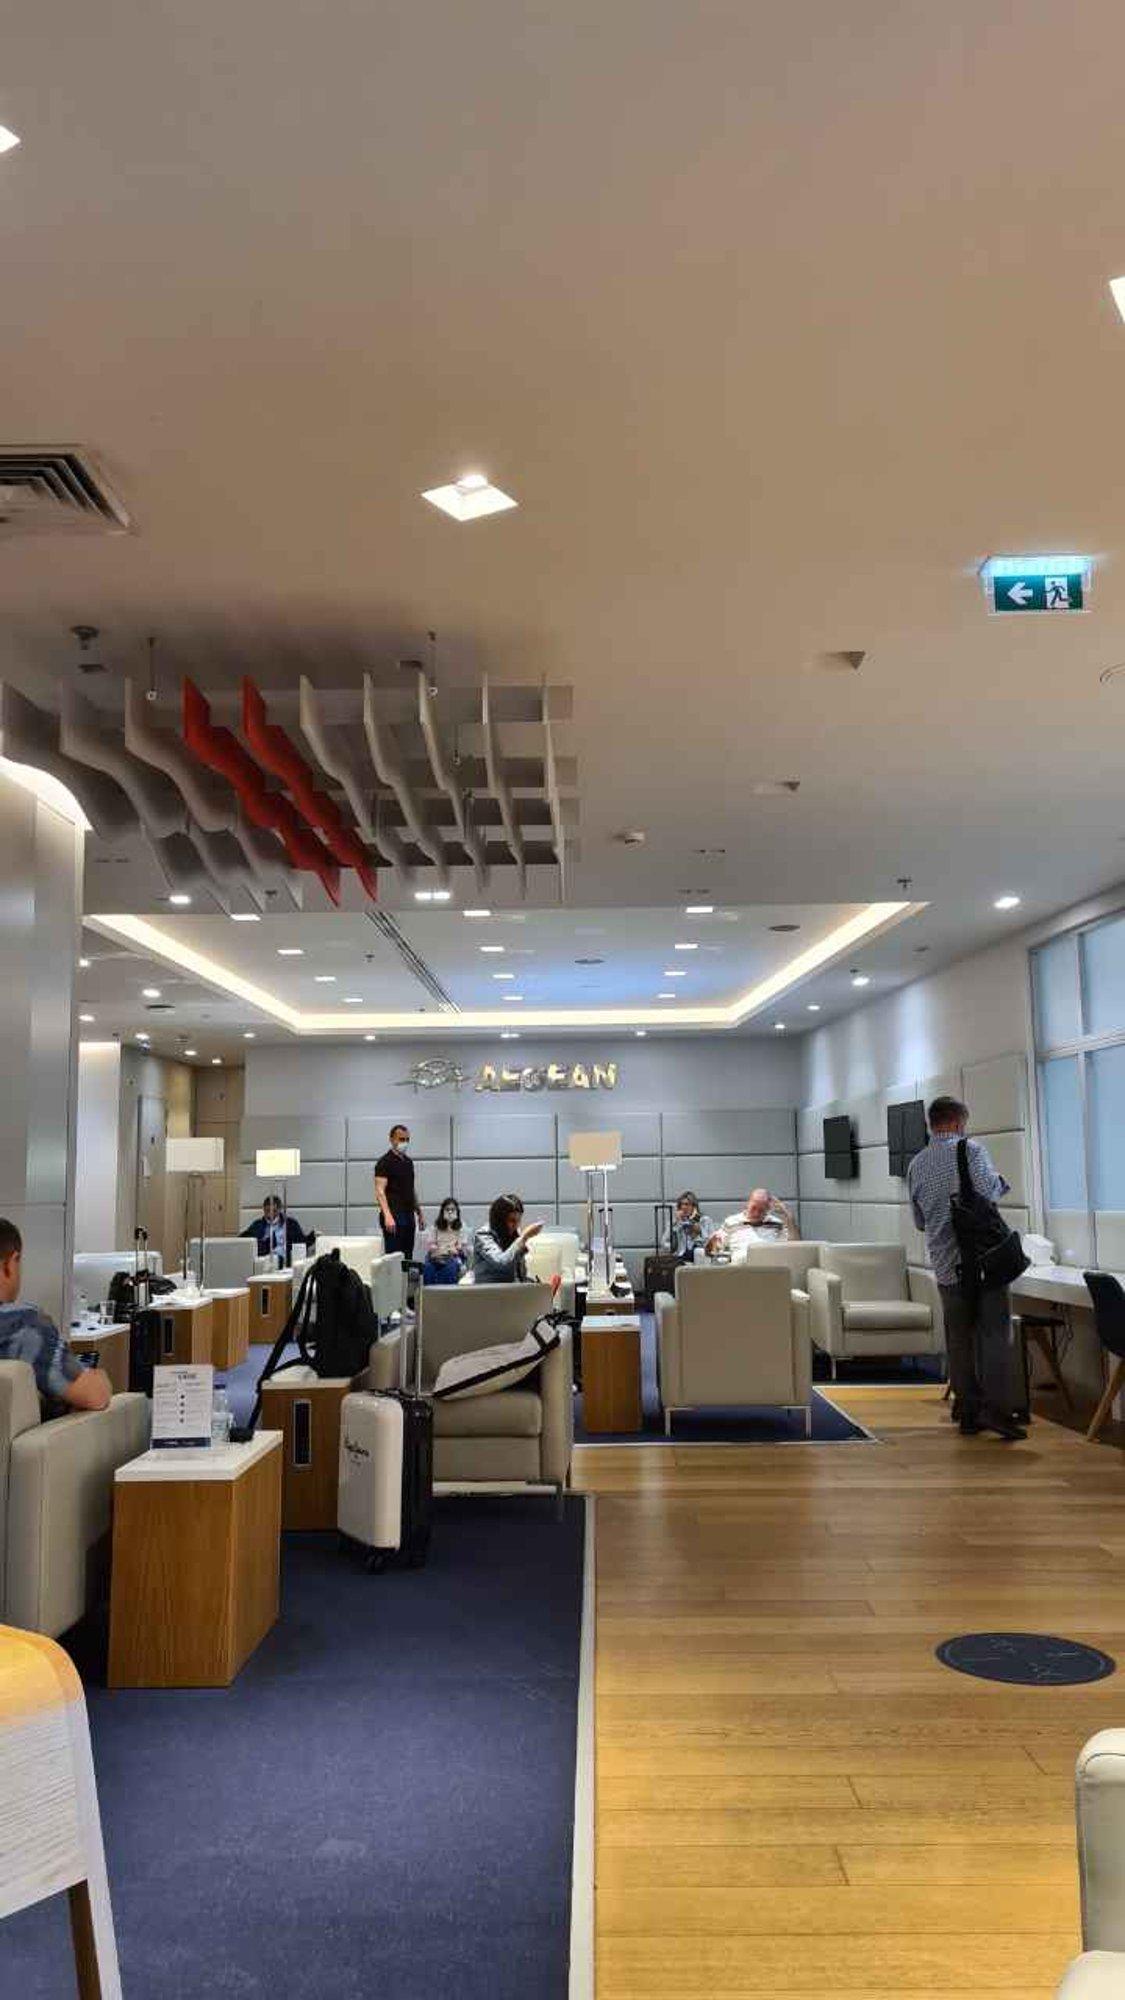 Aegean Business Lounge image 2 of 11